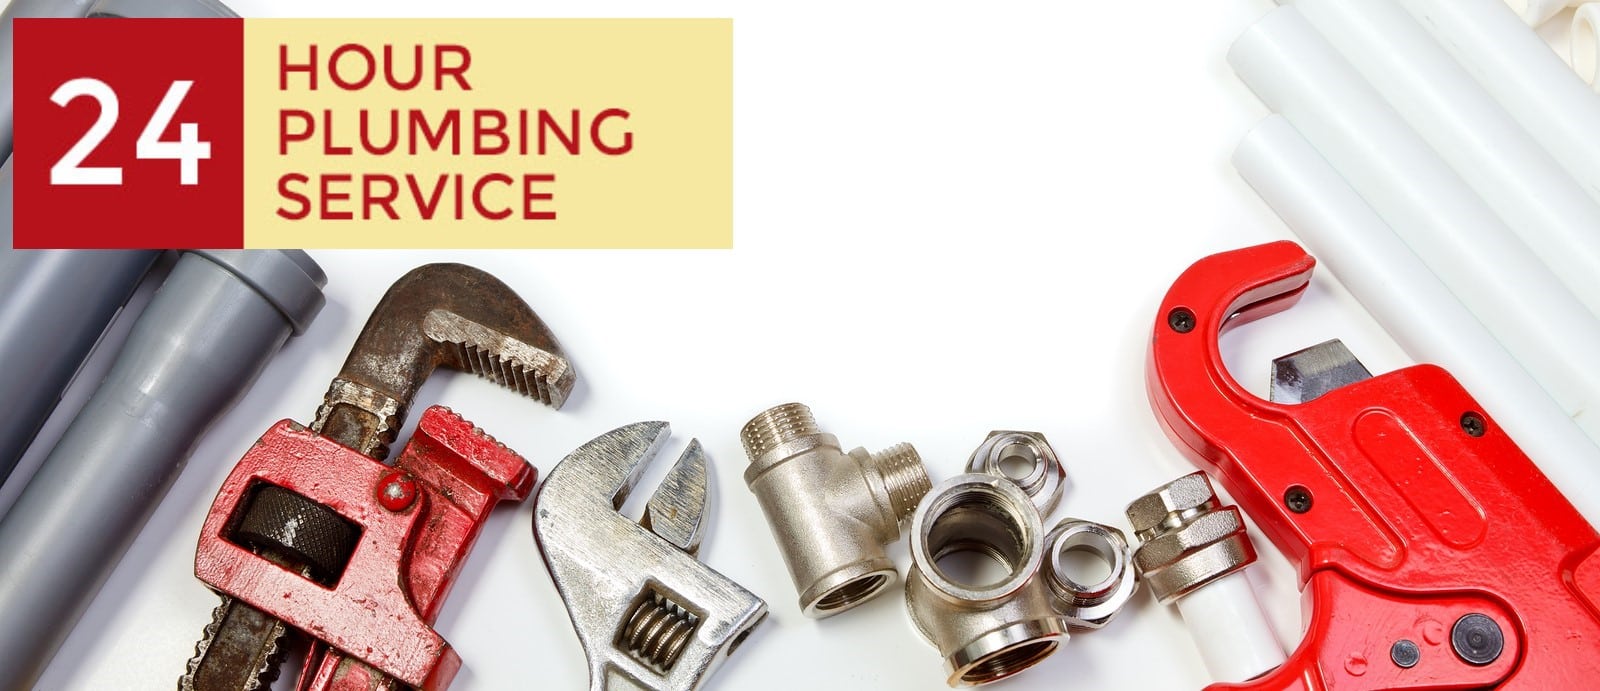 Most Common Plumbing Issues & How To Fix Them